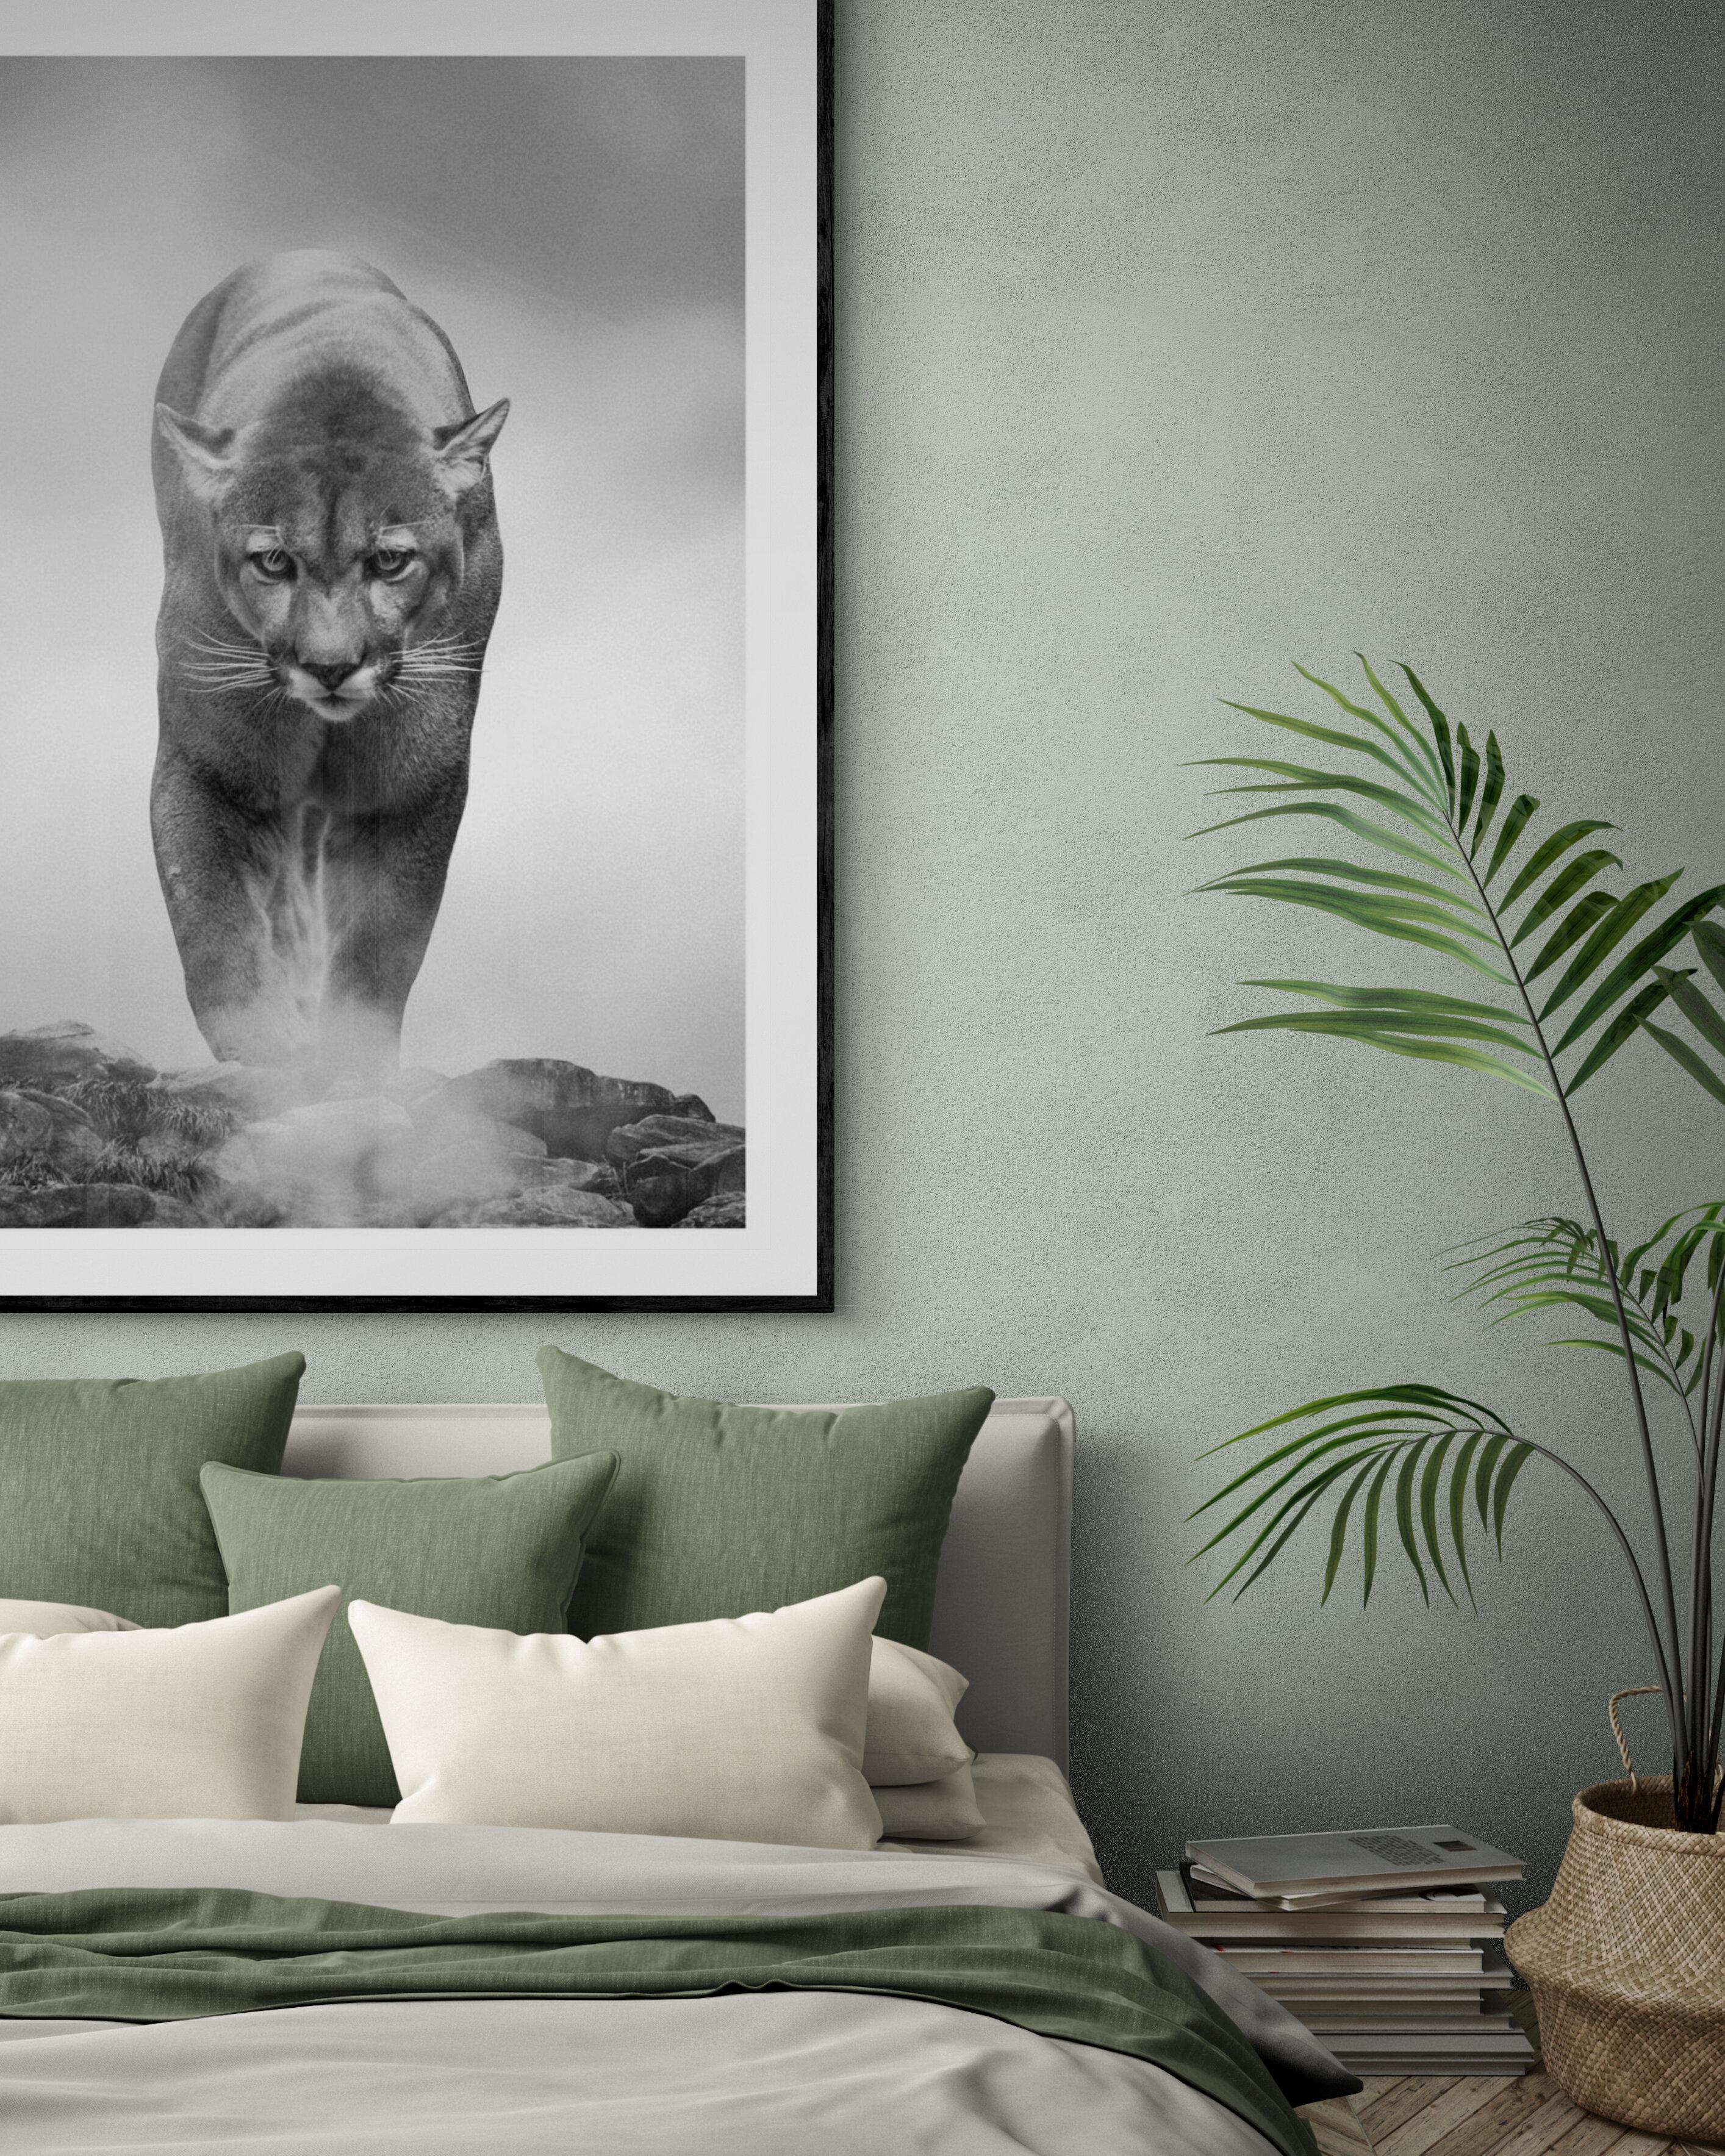 This is a contemporary photograph of a Mountain Lion. 
36x48 
Printed on kodak lusterl paper using archival inks
Framing available. Inquire for rates. 


SERIES CURRENTLY BEING SHOT

